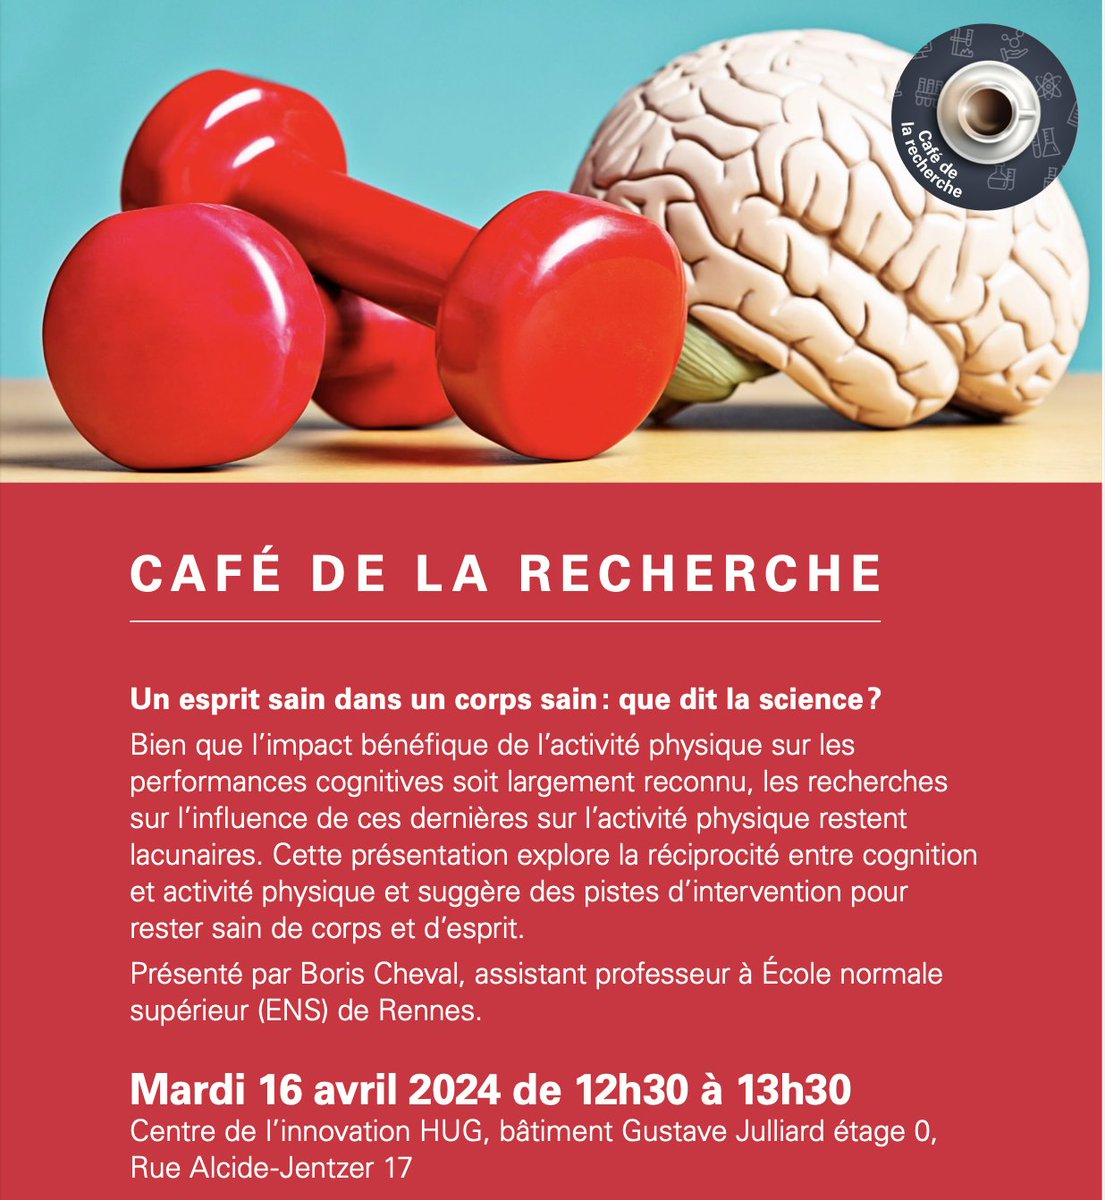 I am delighted to present and discuss the relationship between physical activity and cognitive function at the 'Research Café' organized by the University Hospitals of Geneva. Détails : hug.ch/evenement/cafe… @ENSRennes @ENSRennes2SEP @VIPS_2 @RennesUniv @STAPS_Rennes2